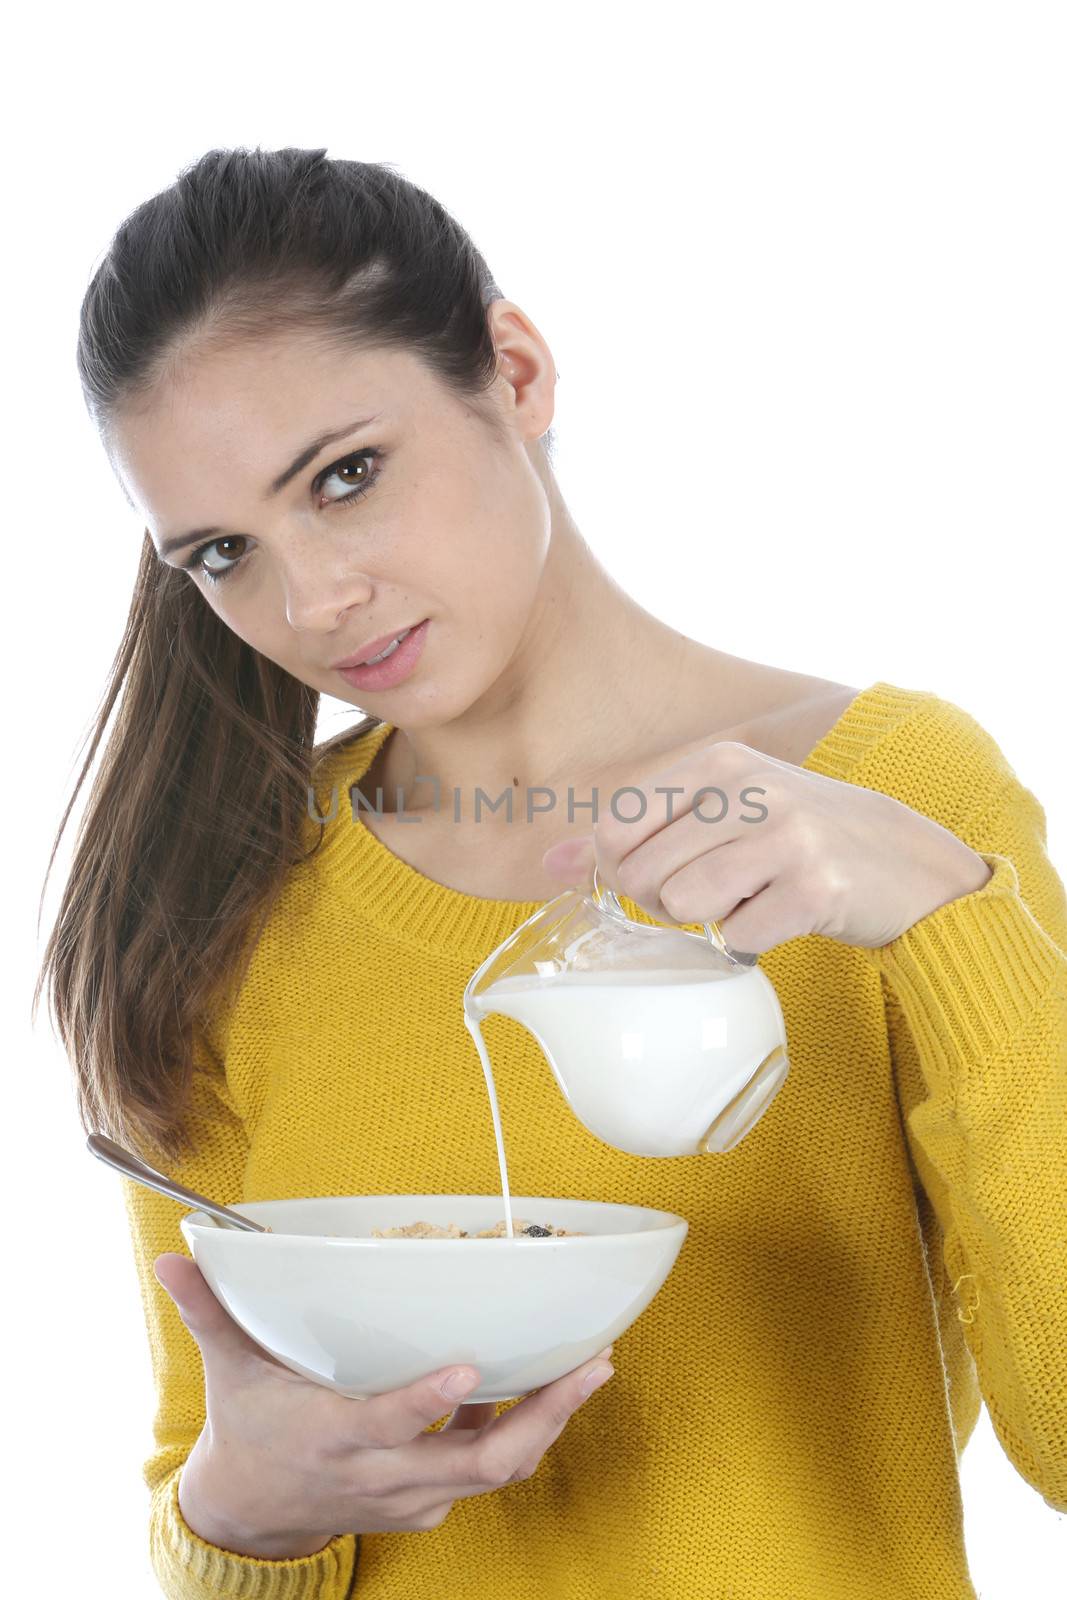 Woman Holding a Bowl of Breakfast Cereals